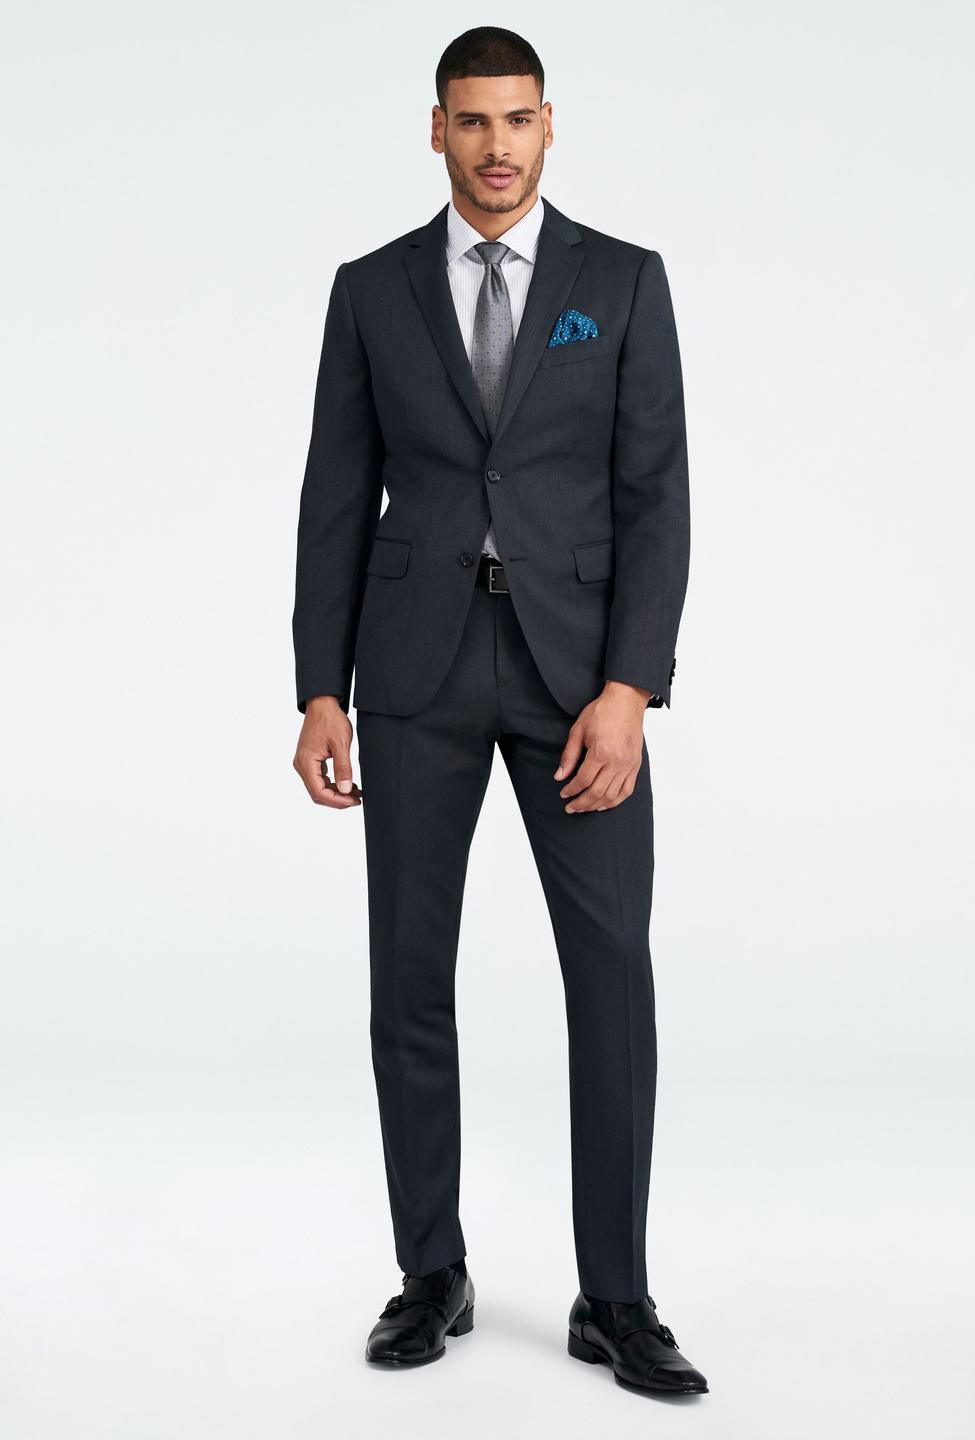 Gray blazer - Hereford Solid Design from Premium Indochino Collection